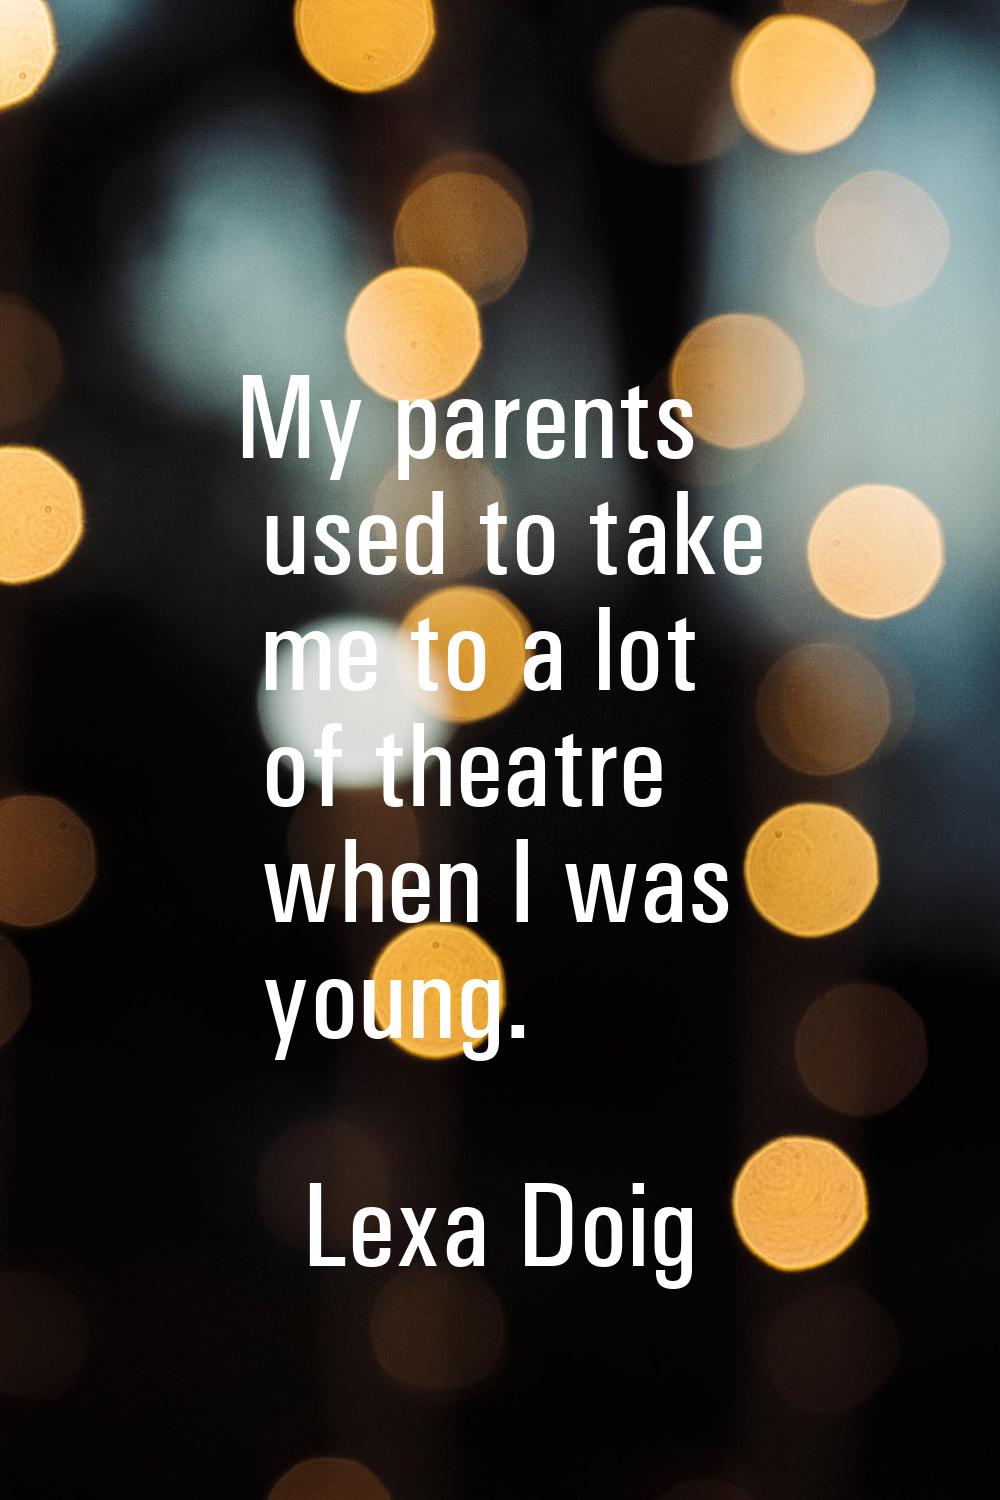 My parents used to take me to a lot of theatre when I was young.